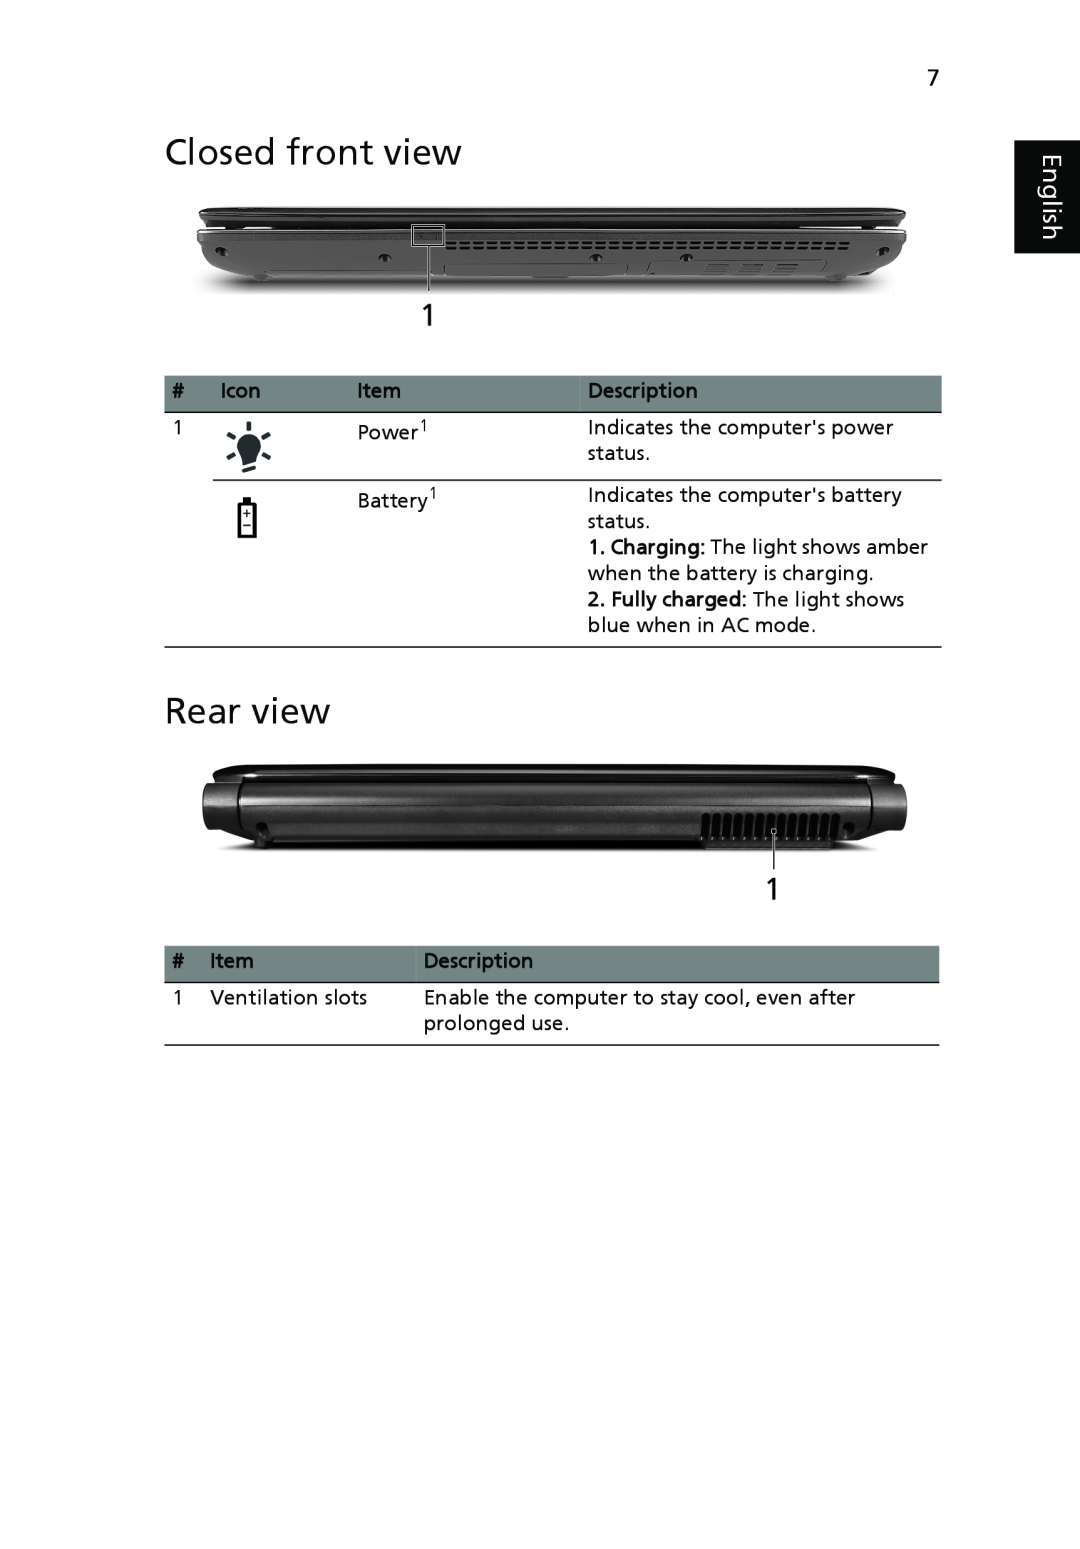 Acer 4740 Series manual Closed front view, Rear view, English 